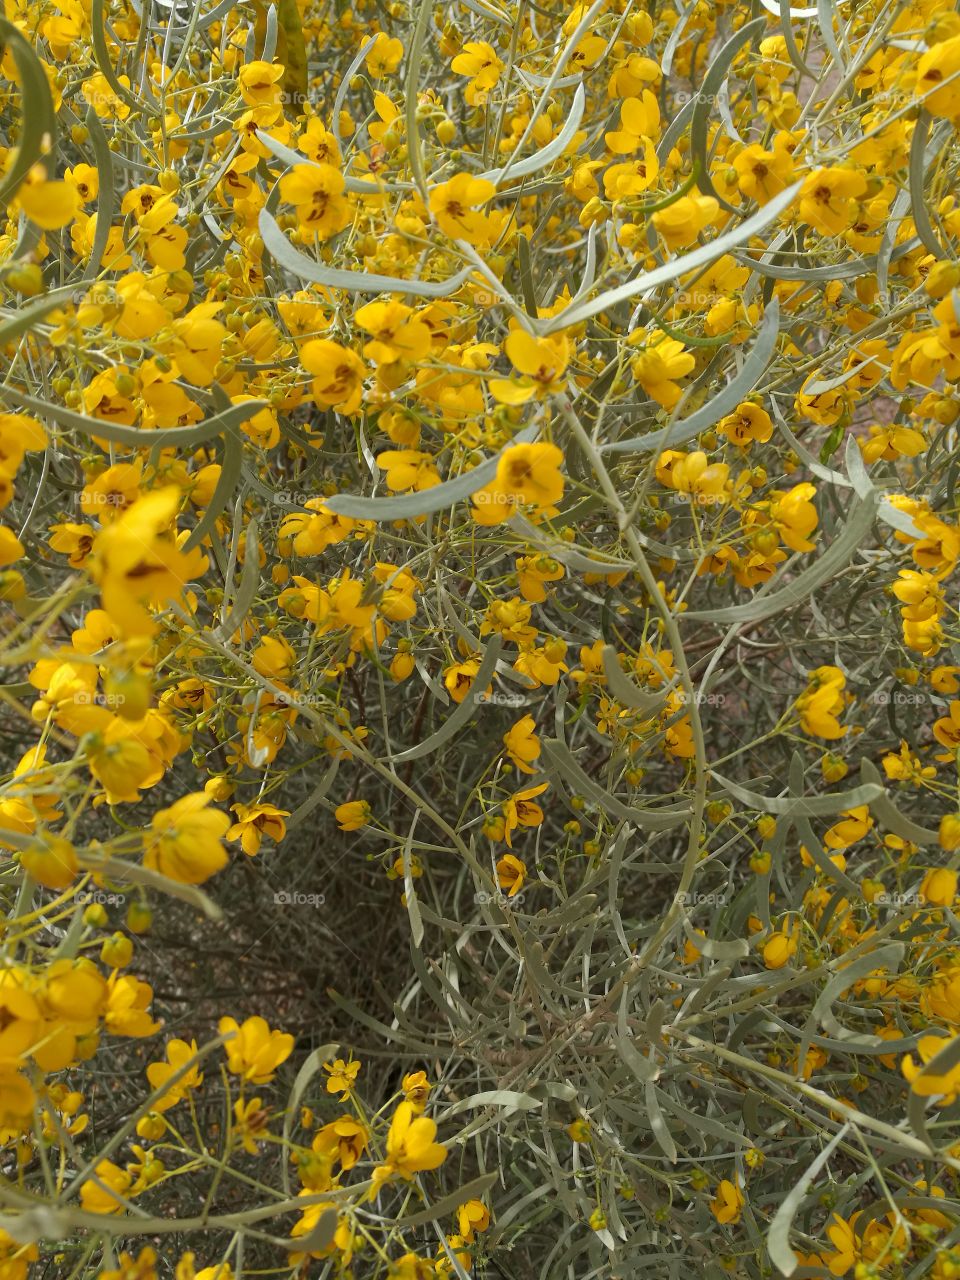 The blooming of yellow sage flowers in the park